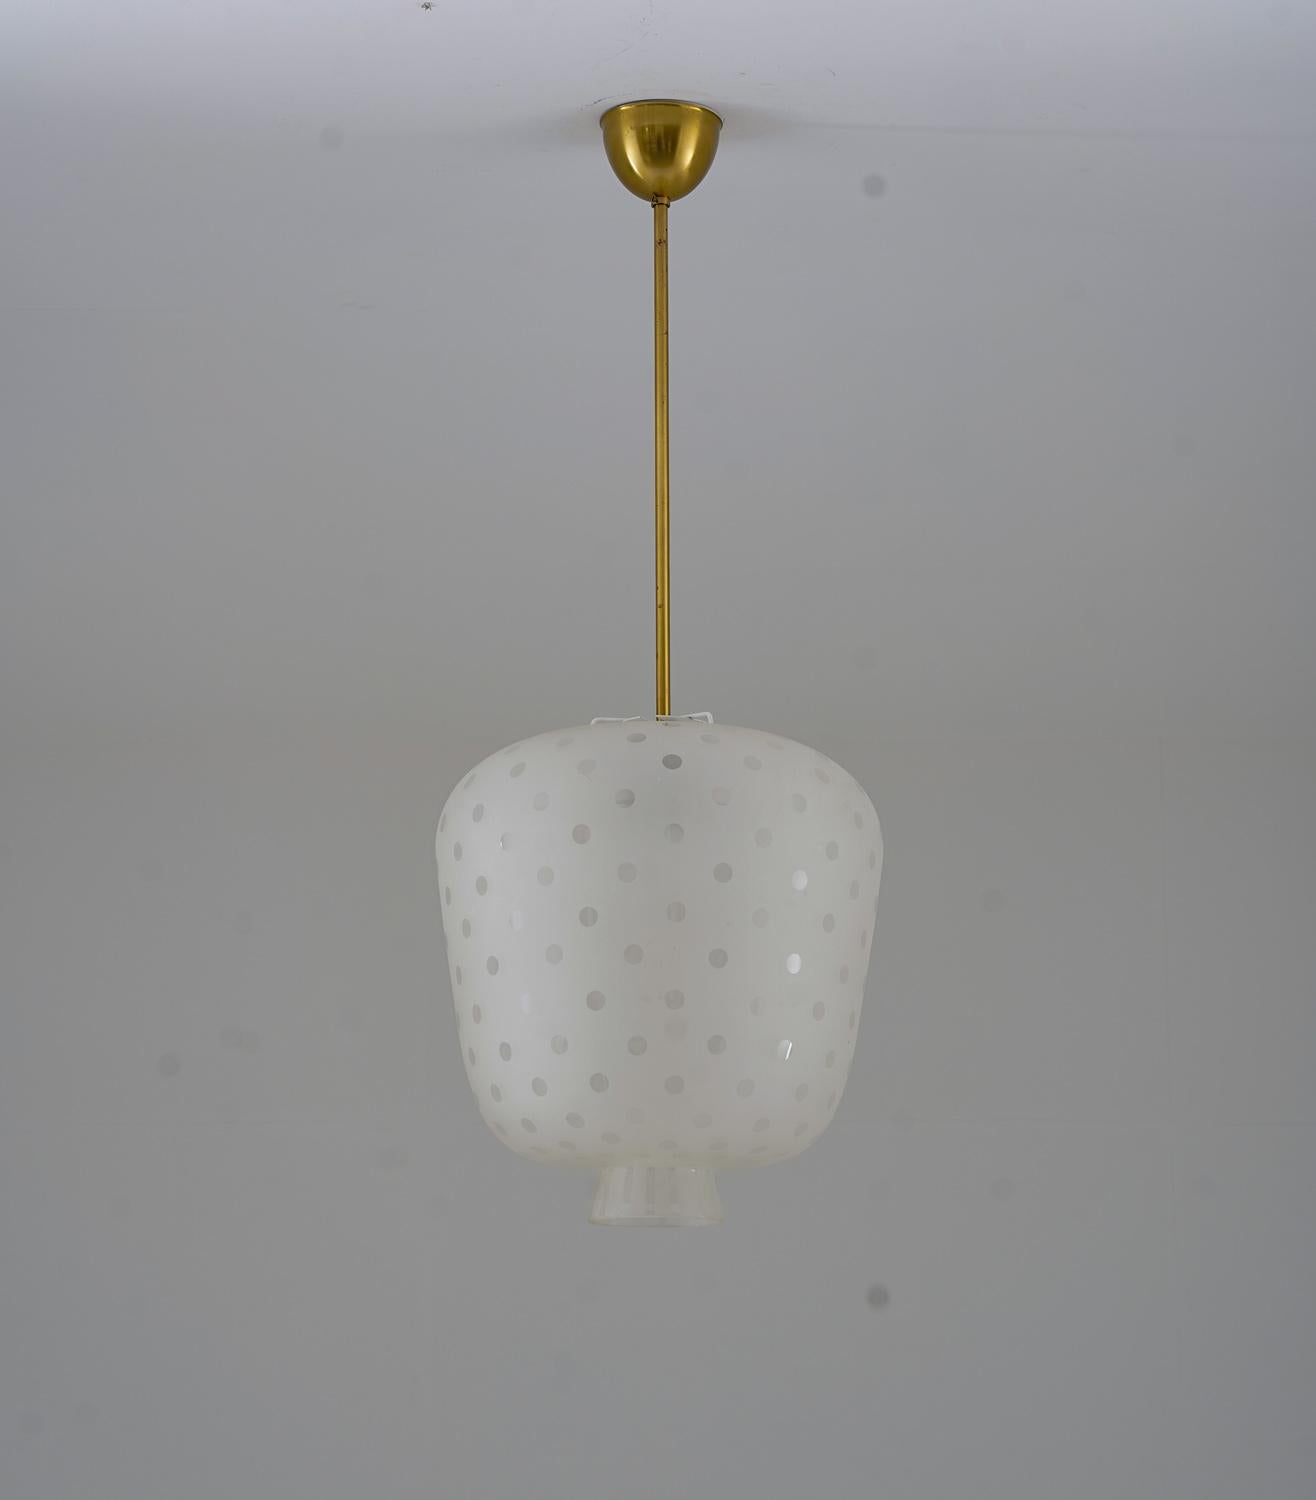 This pendant is a notable example of Swedish craftsmanship from the 1940s. Its large size and distinctive design make it a captivating piece. The pendant is made of blasted glass, which lends it a unique texture and appearance.

The lamp features